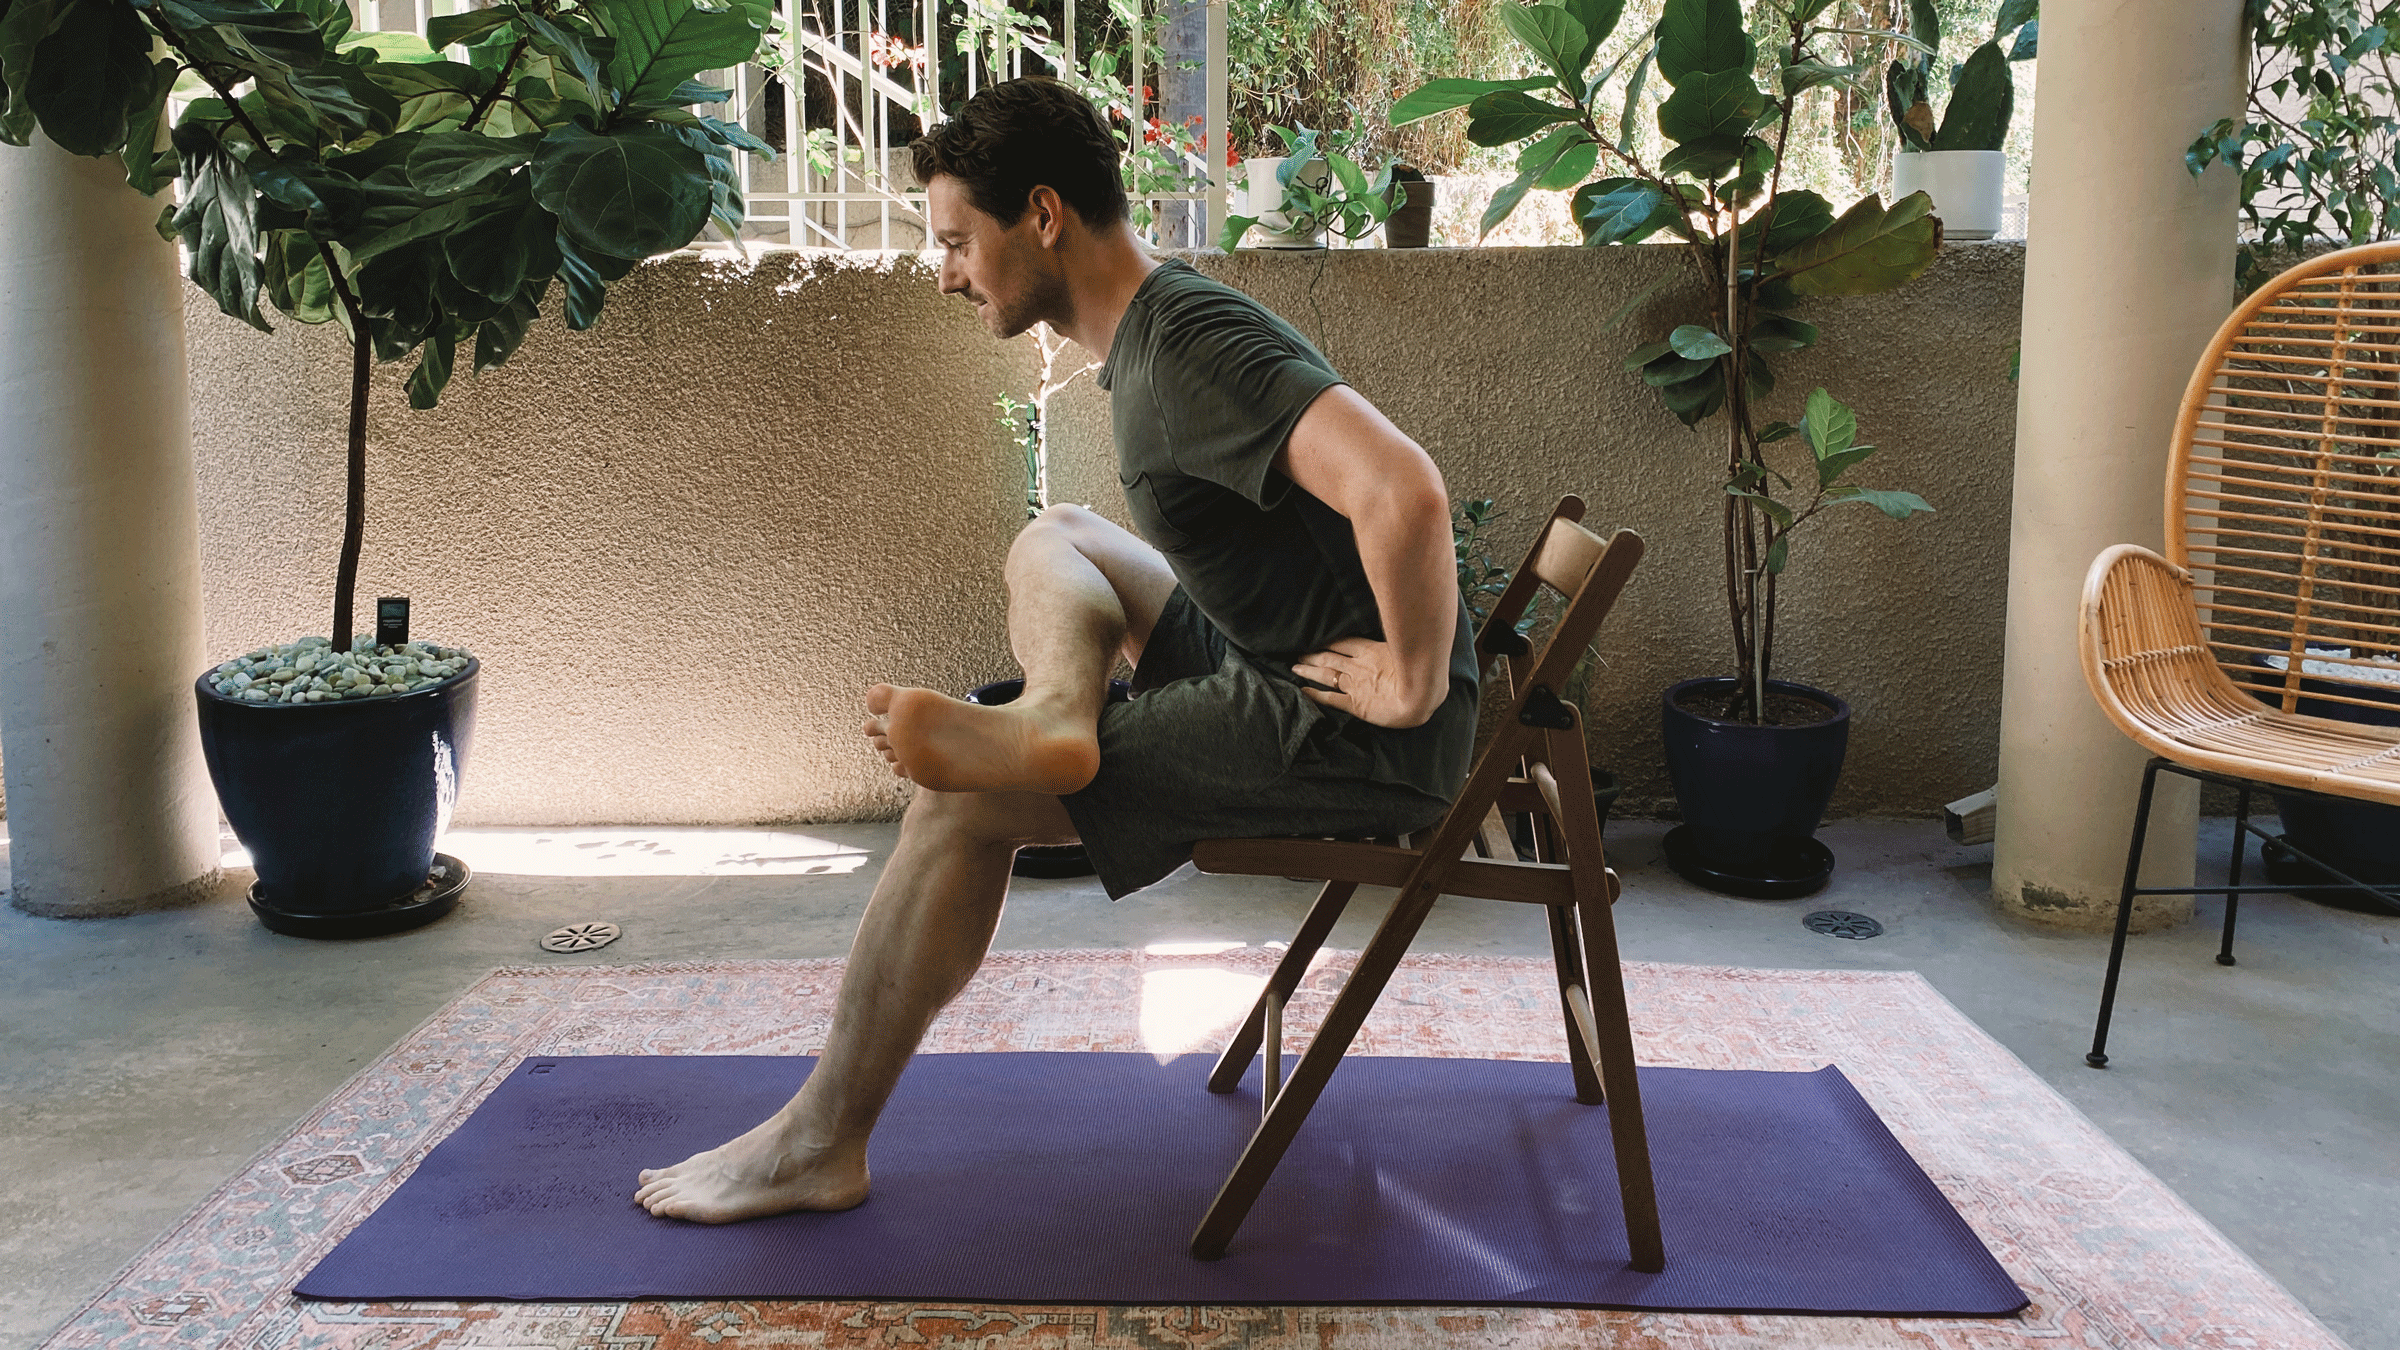 Start With These 5 Chair Yoga Poses To Stay Healthy - Portable  Physiotherapy Machine & Equipment- UltraCare PRO